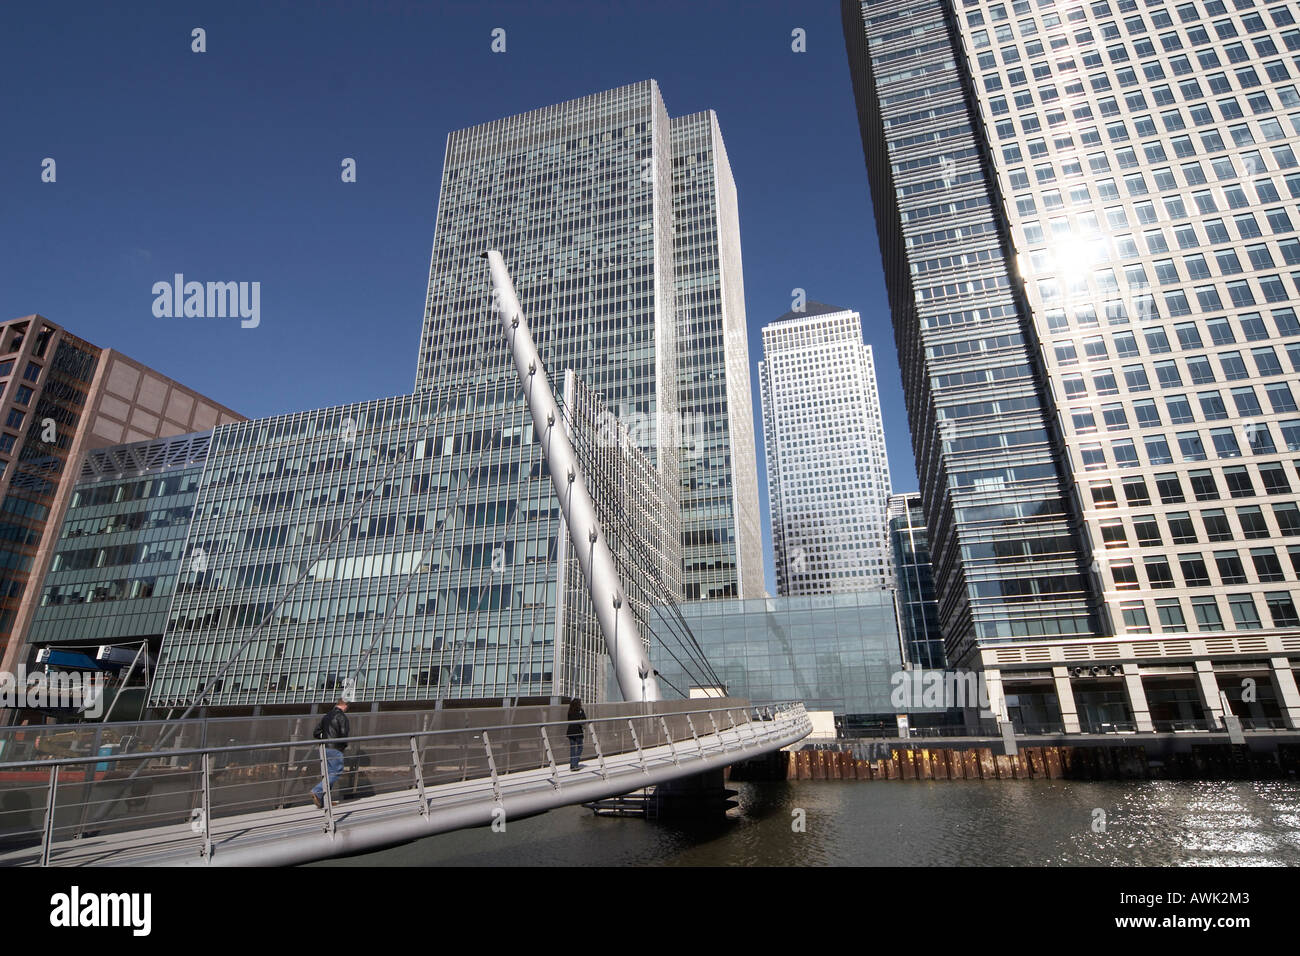 Canary Wharf tall modern office steel , glass skyscraper buildings with people on footbridge over West India Docks in Docklands Stock Photo